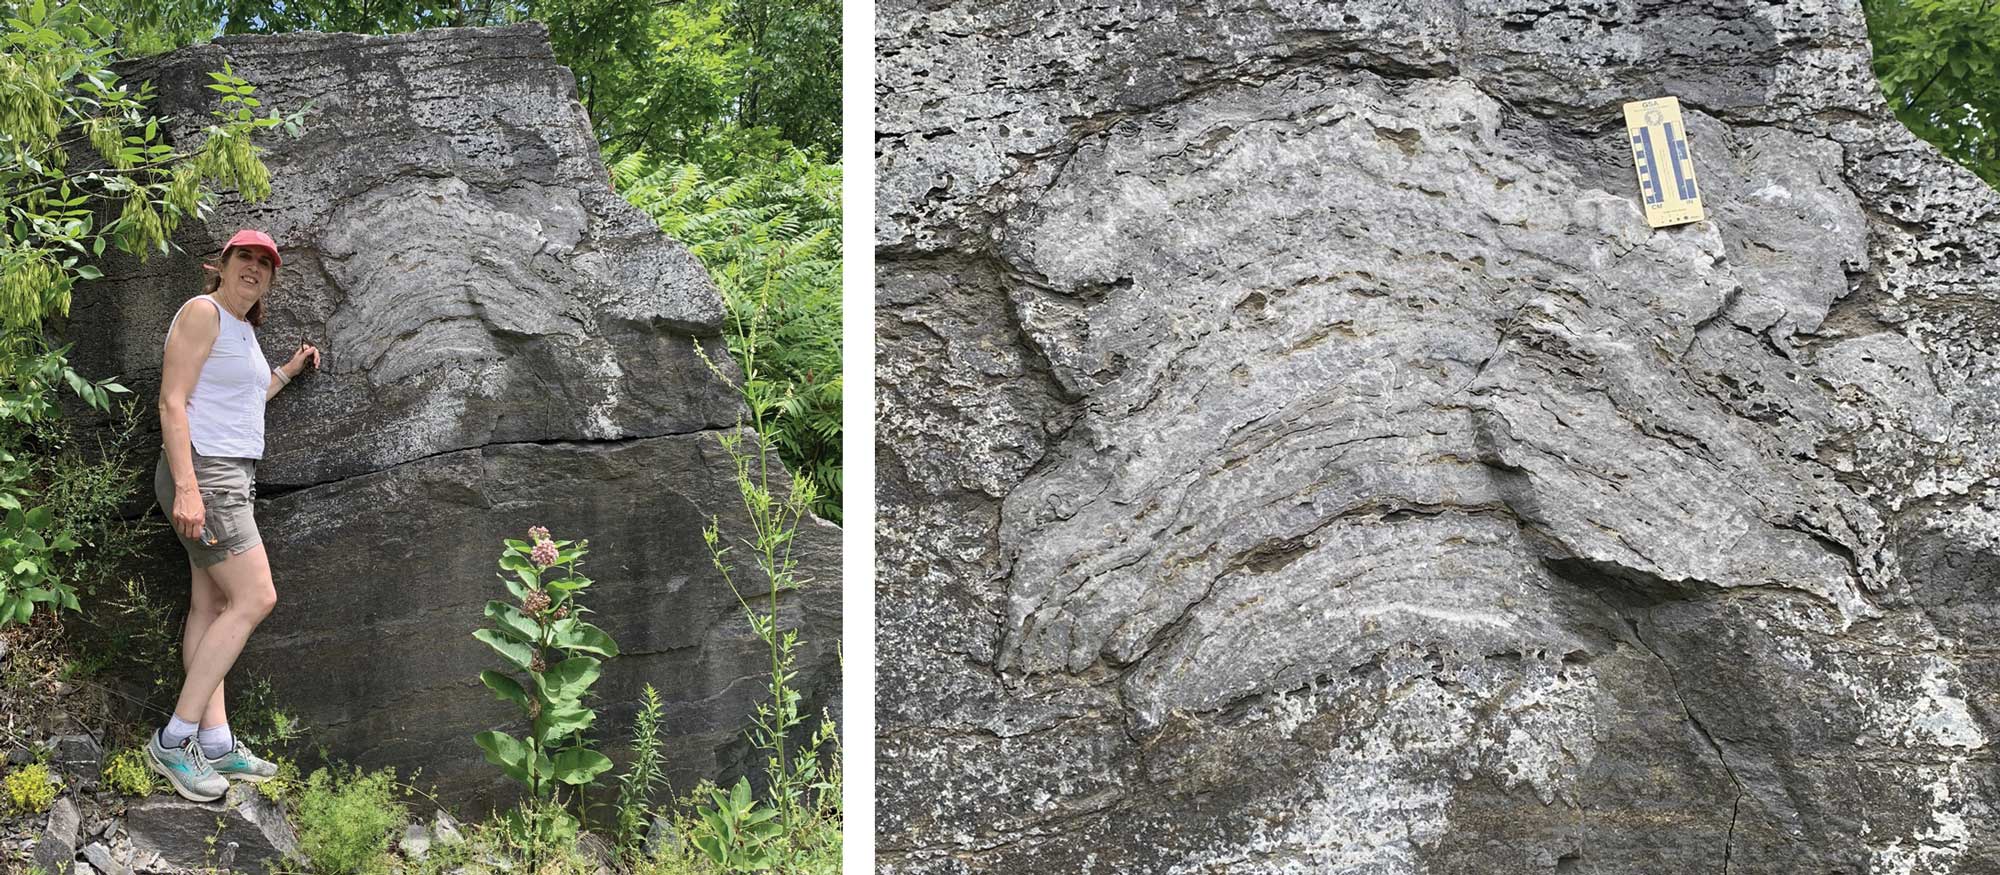 Two photographs showing a large stromatoporoid colony in the Chazy Formation of Vermont.